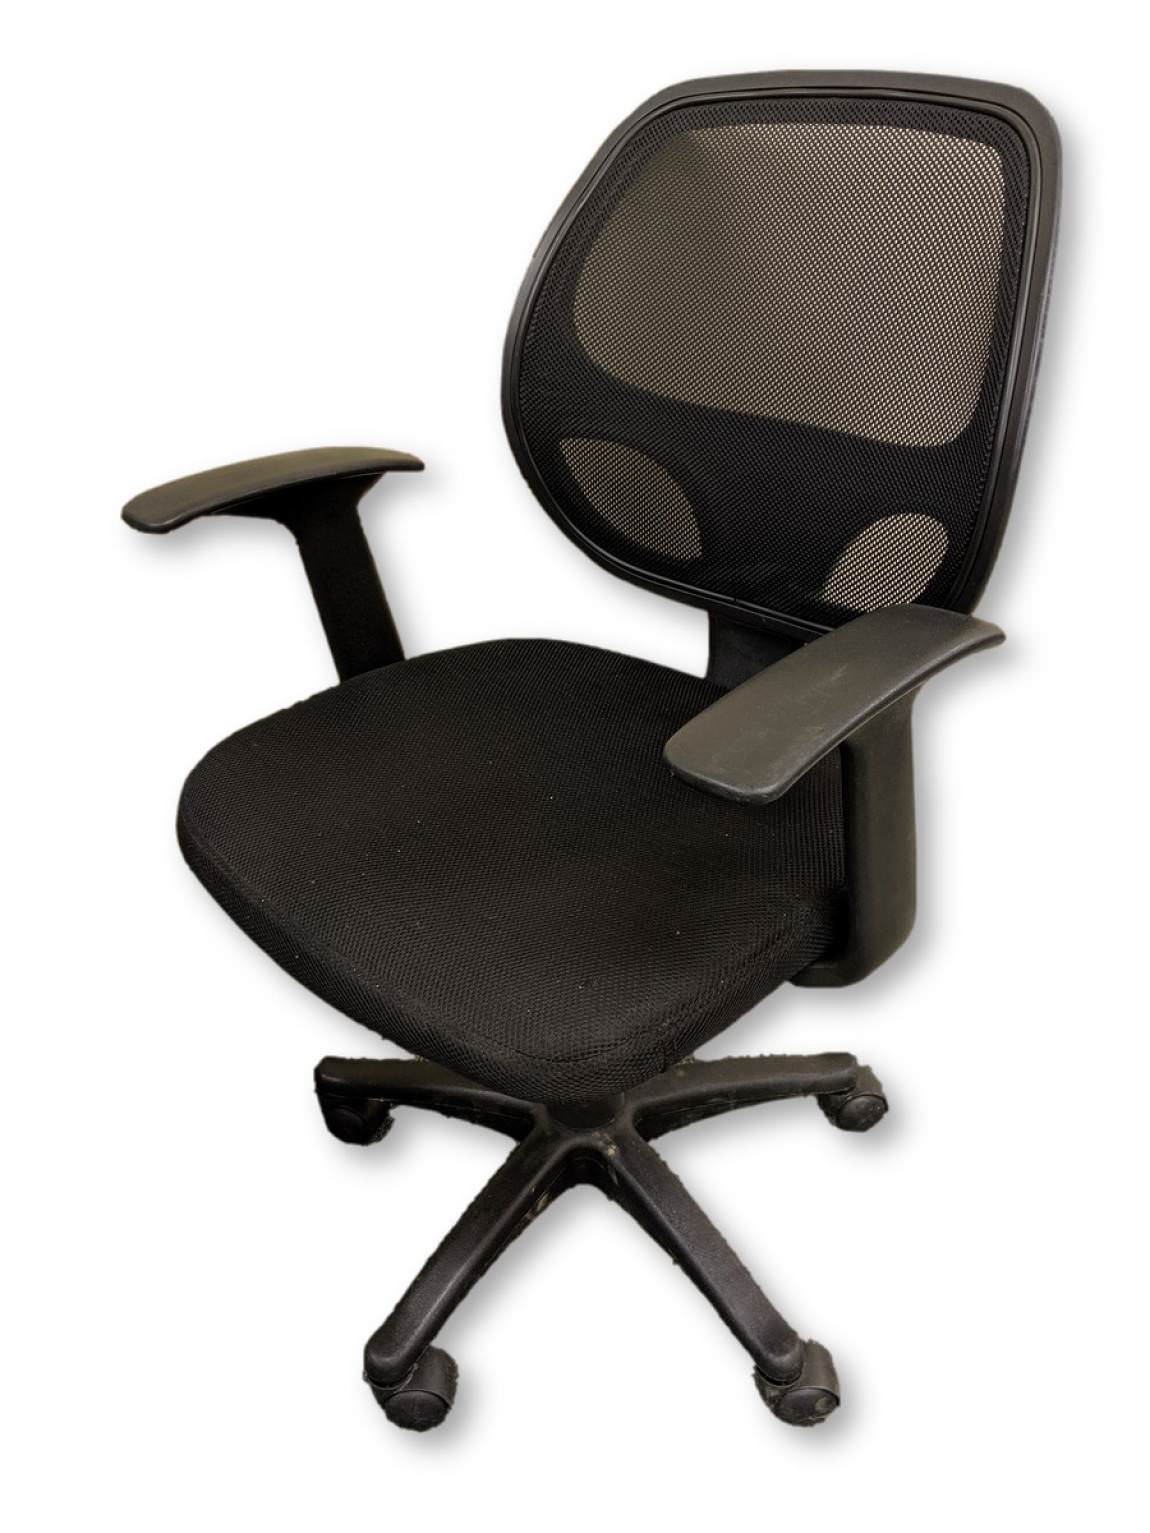 Black Mesh Back Rolling Office Chairs 